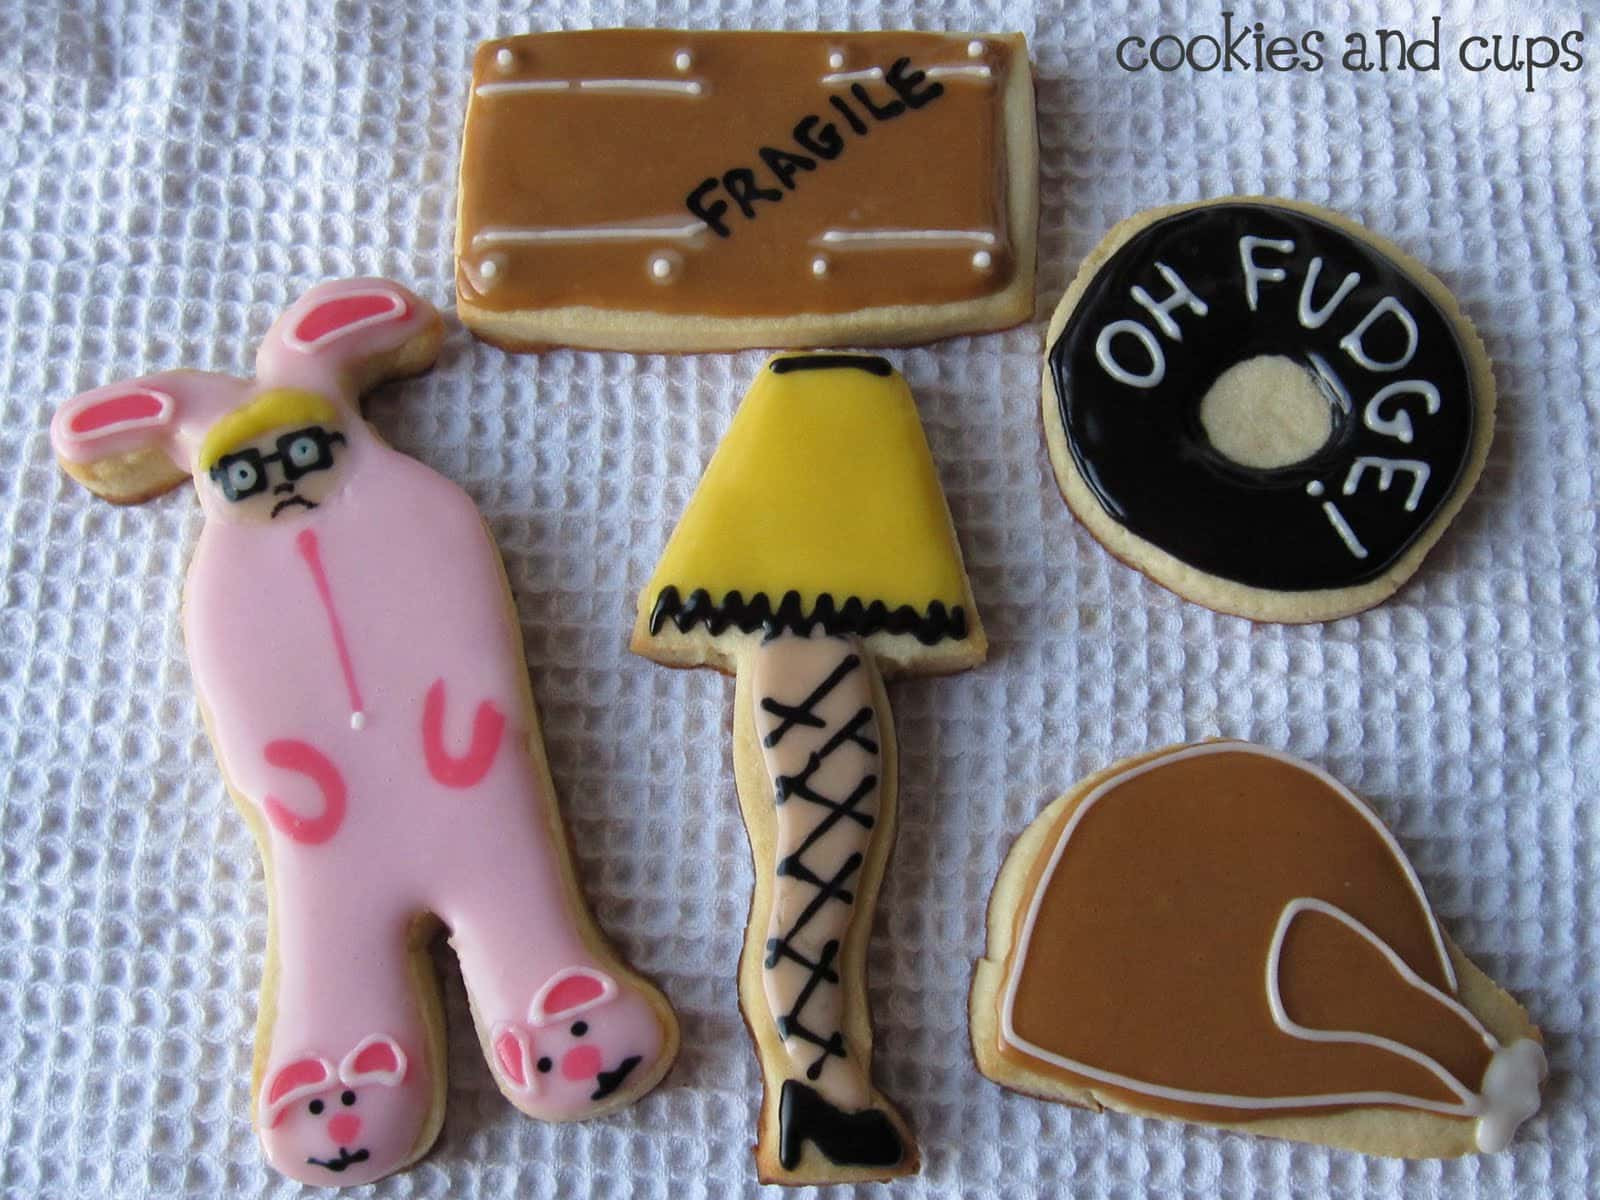 A Christmas Story Cookies
 "You ll shoot your eye out" Cookies and Cups